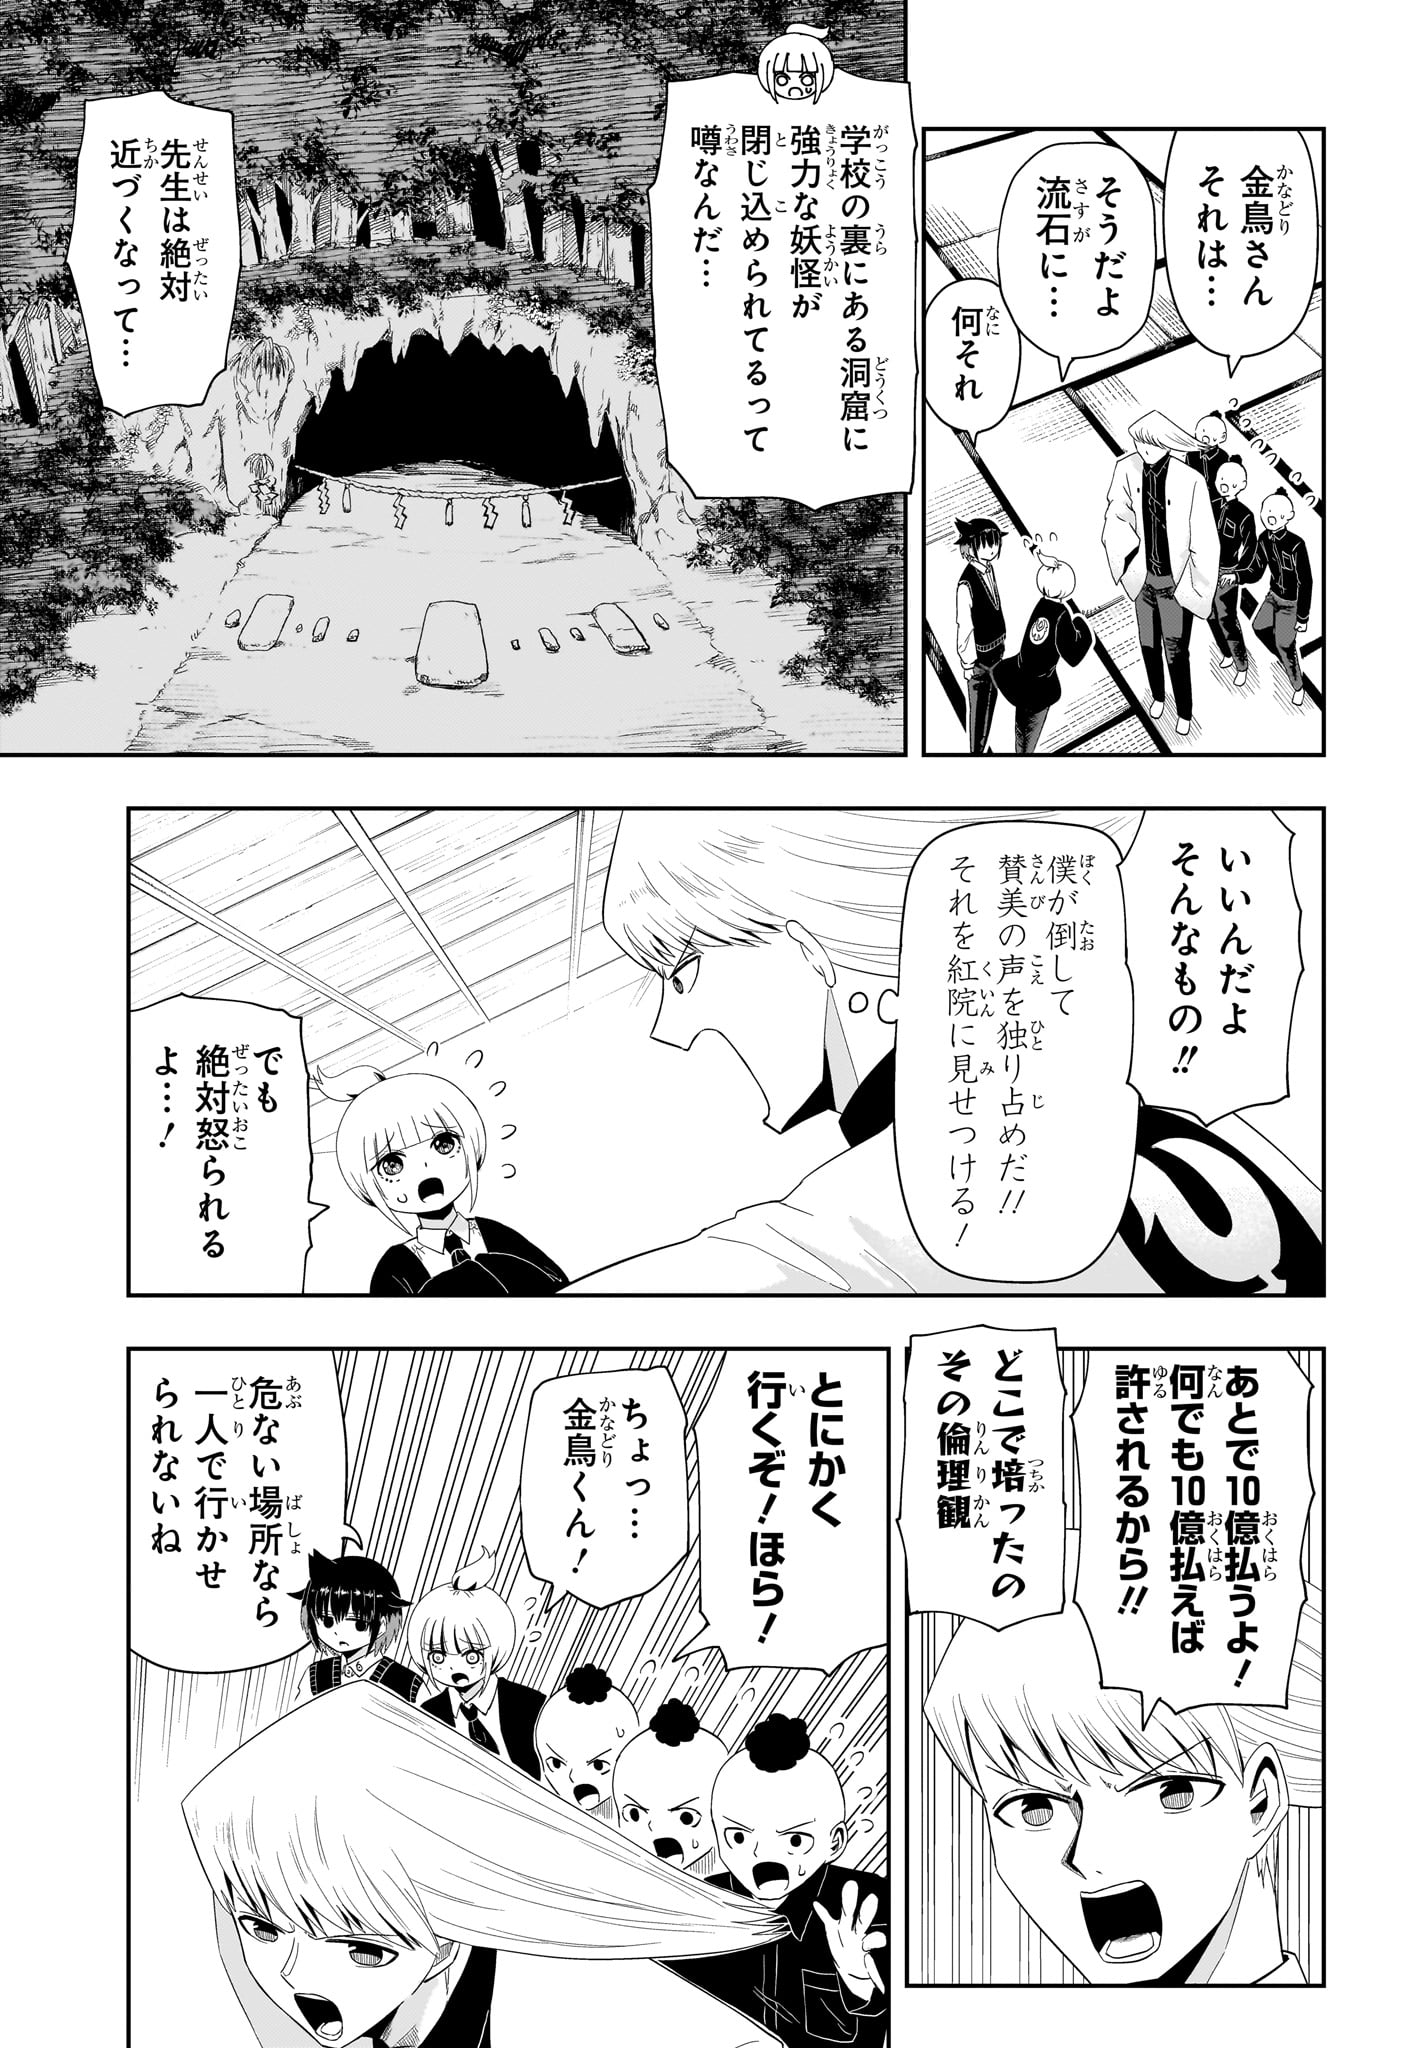 Youkai Buster Murakami - Chapter 6 - Page 5